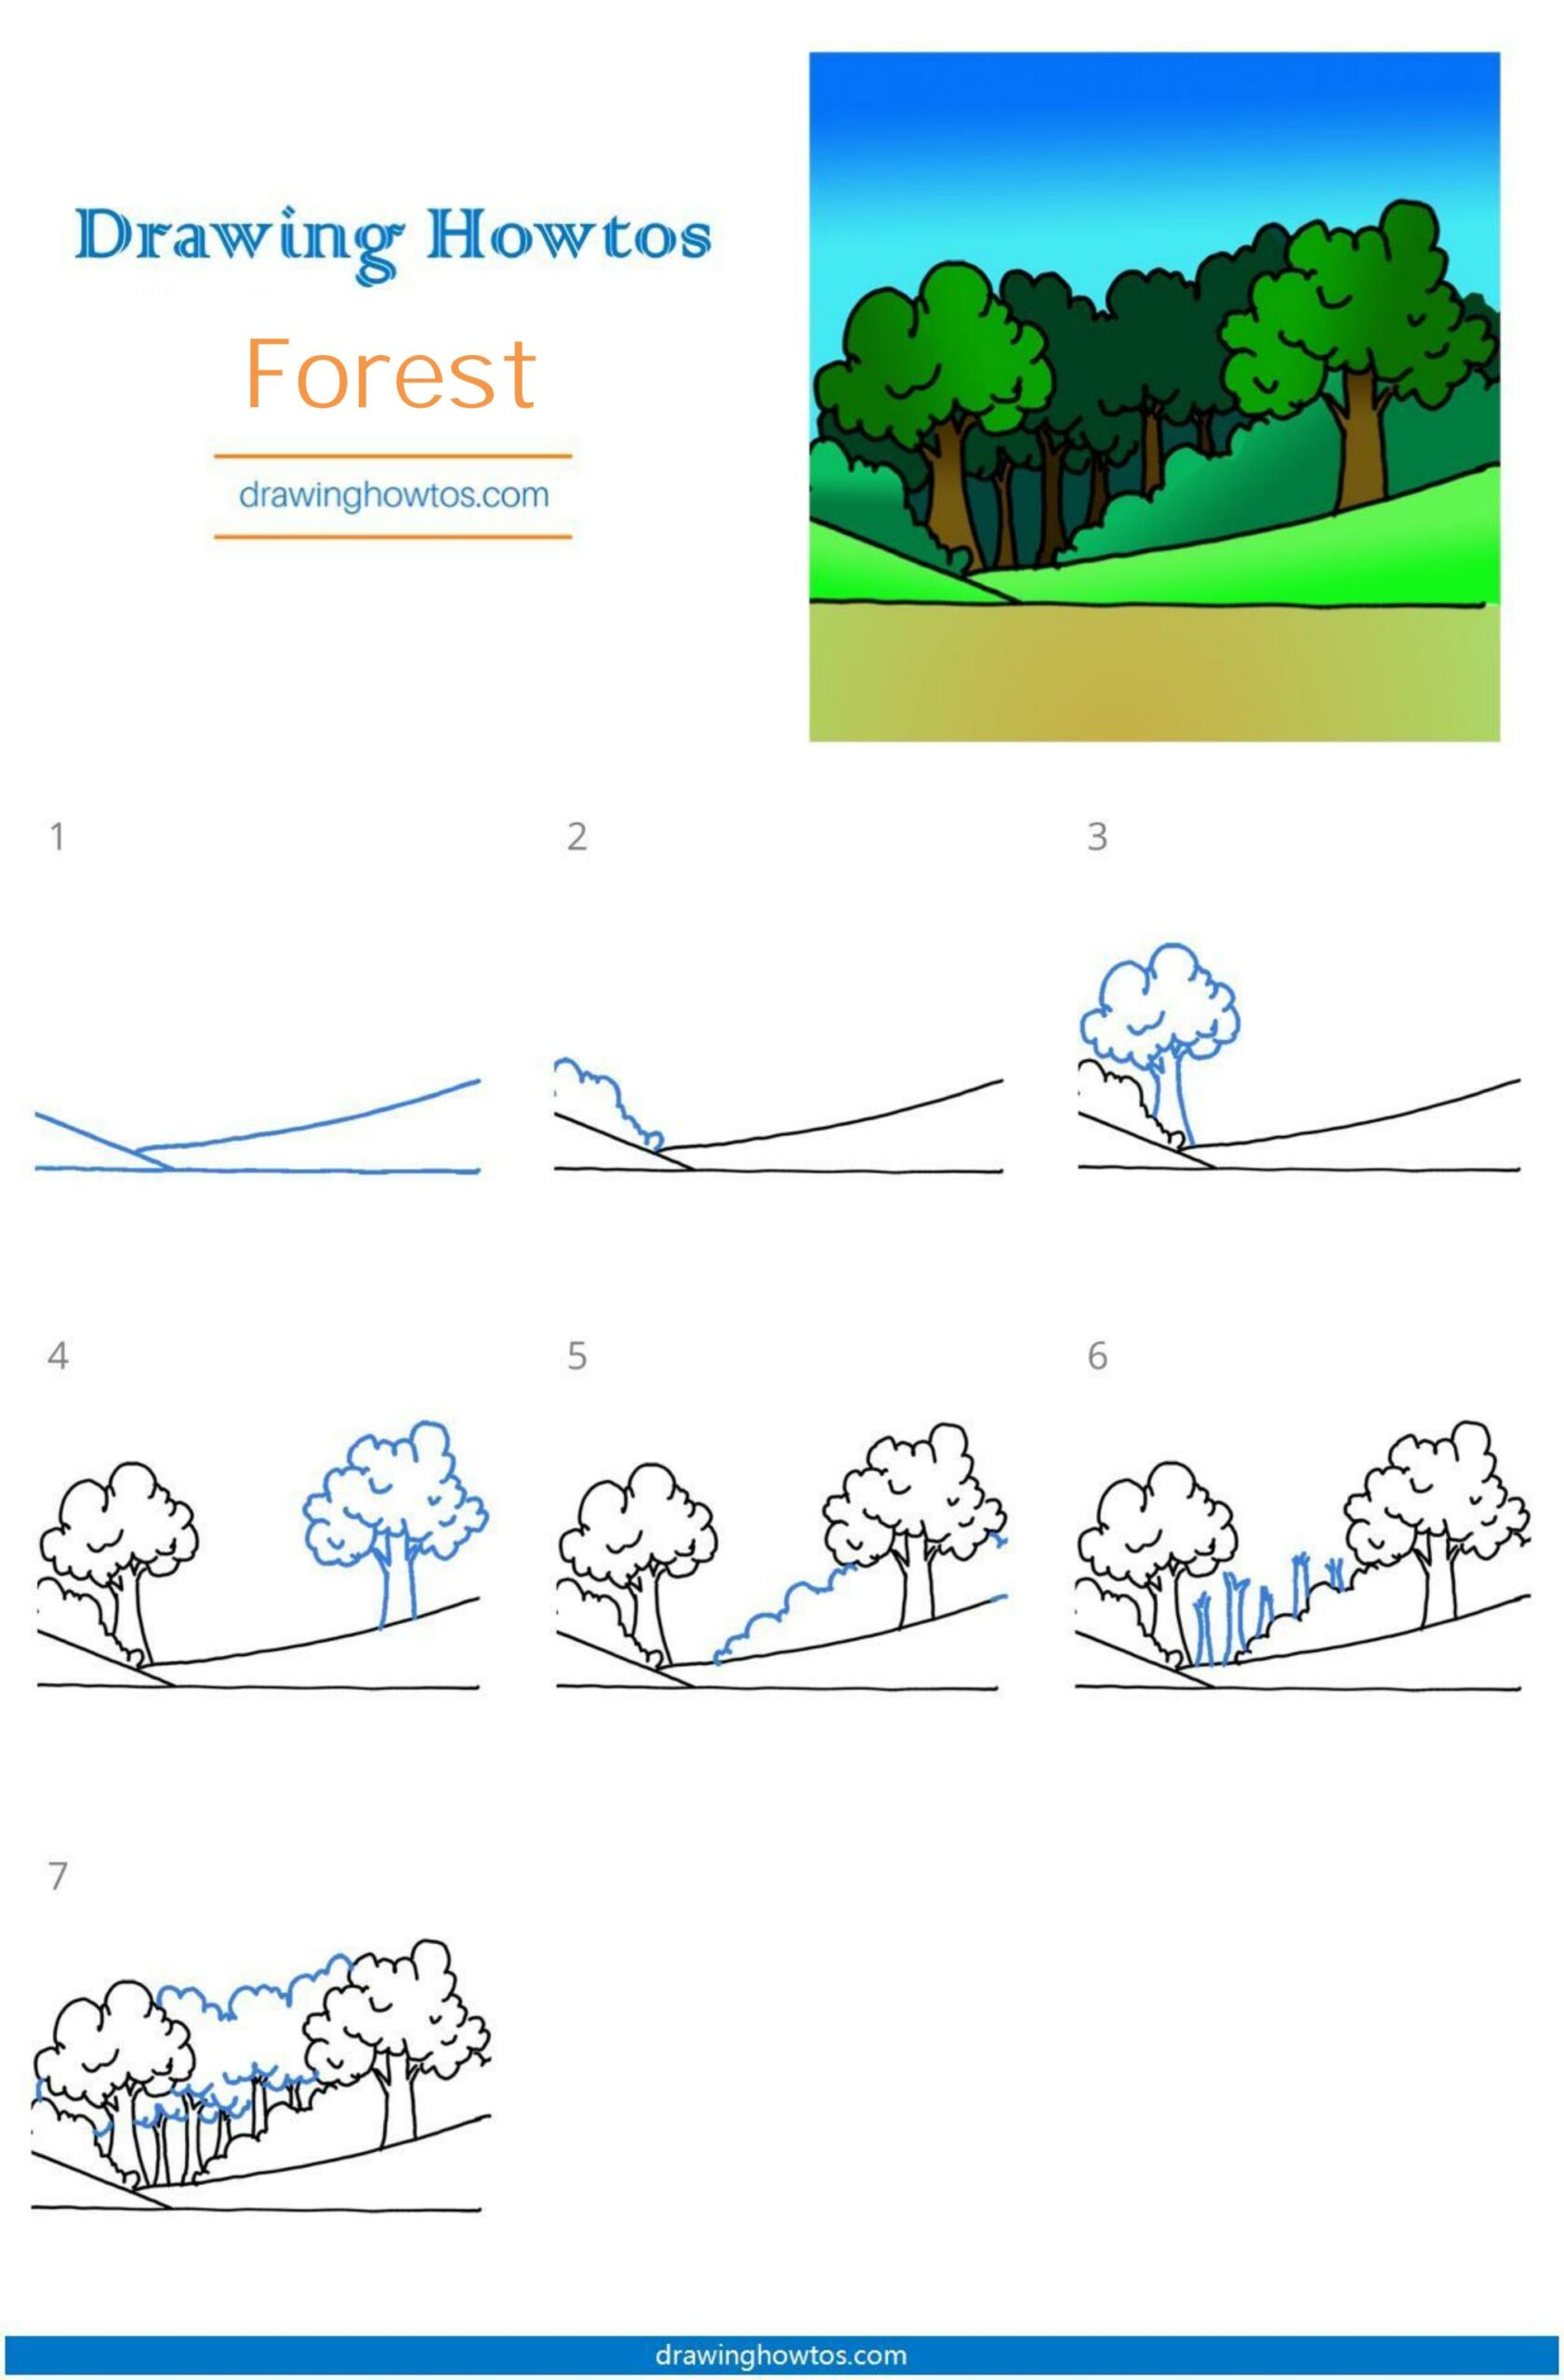 How to Draw a Forest Step by Step